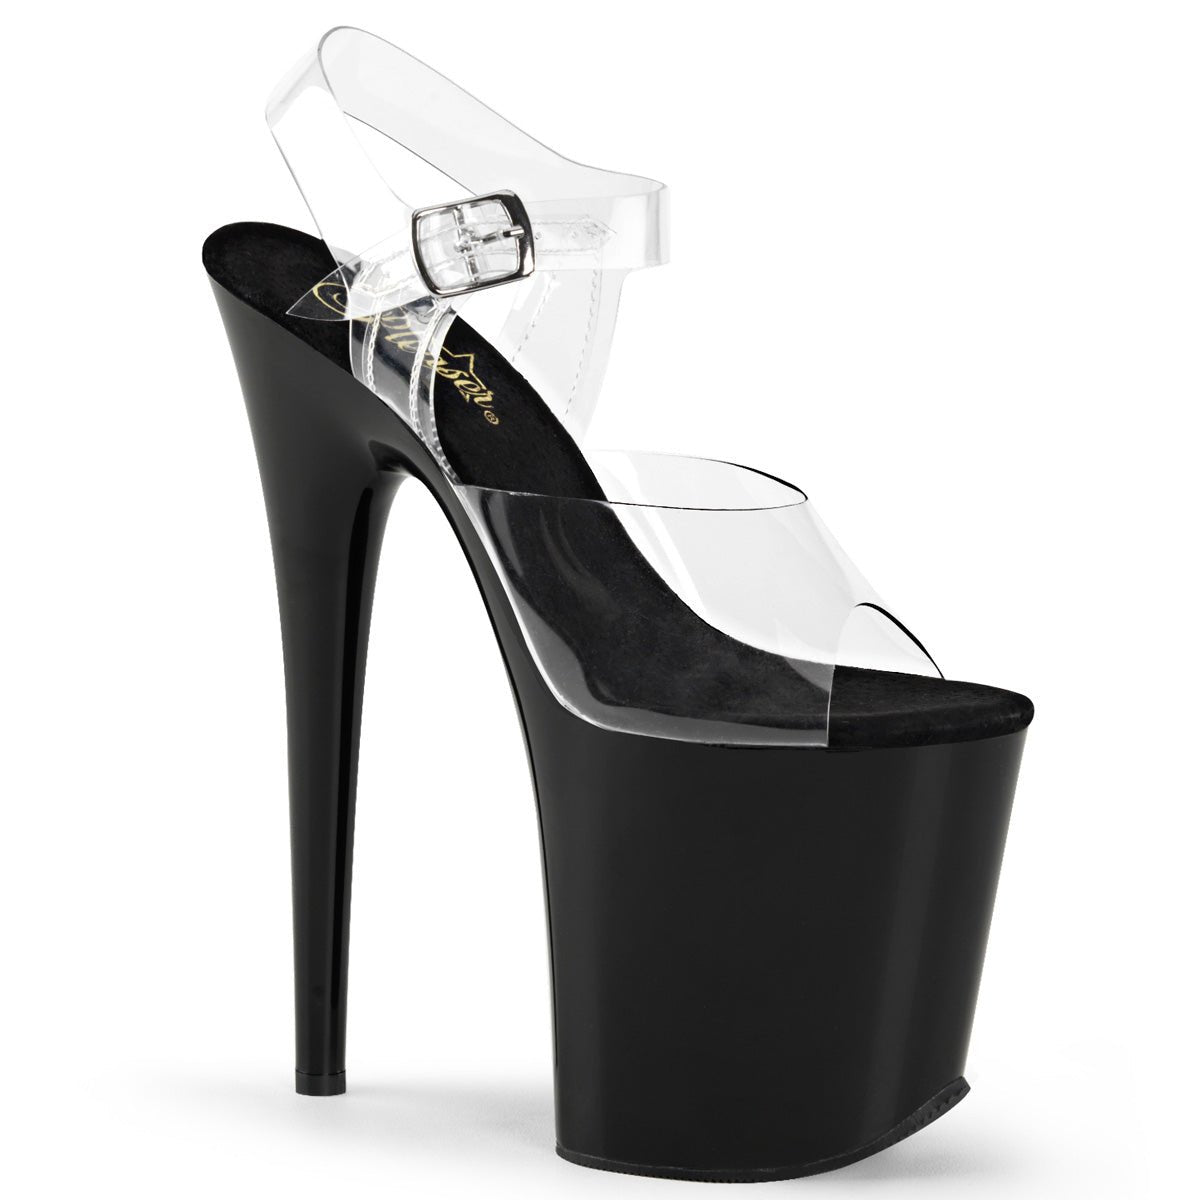 Stunning 9-inch Heel Shoes with a 4.5-inch Platform